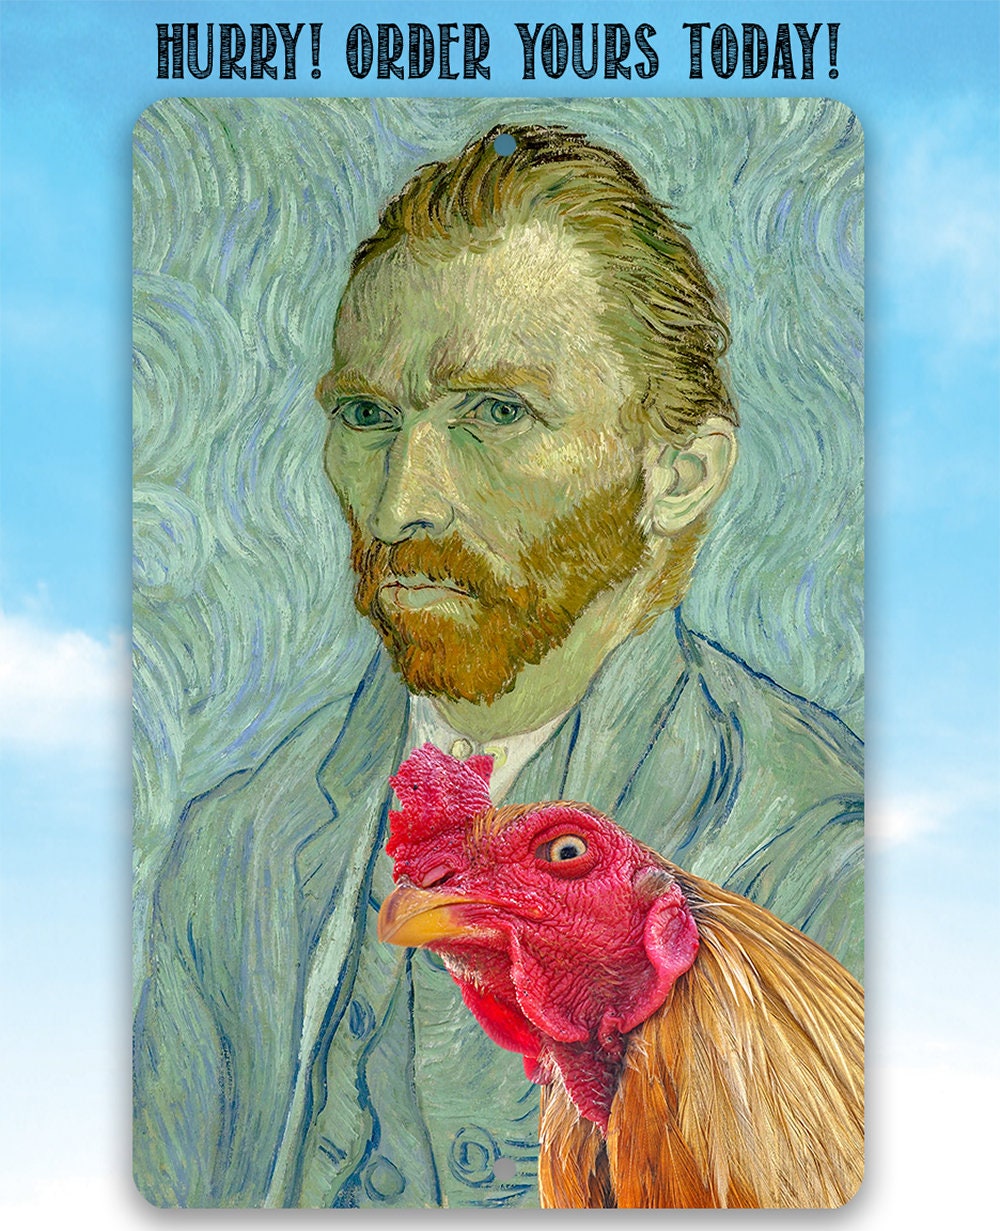 Vincent Van Gogh Self Portrait Painting - Interrupted by Rooster - Metal Sign Metal Sign Lone Star Art 